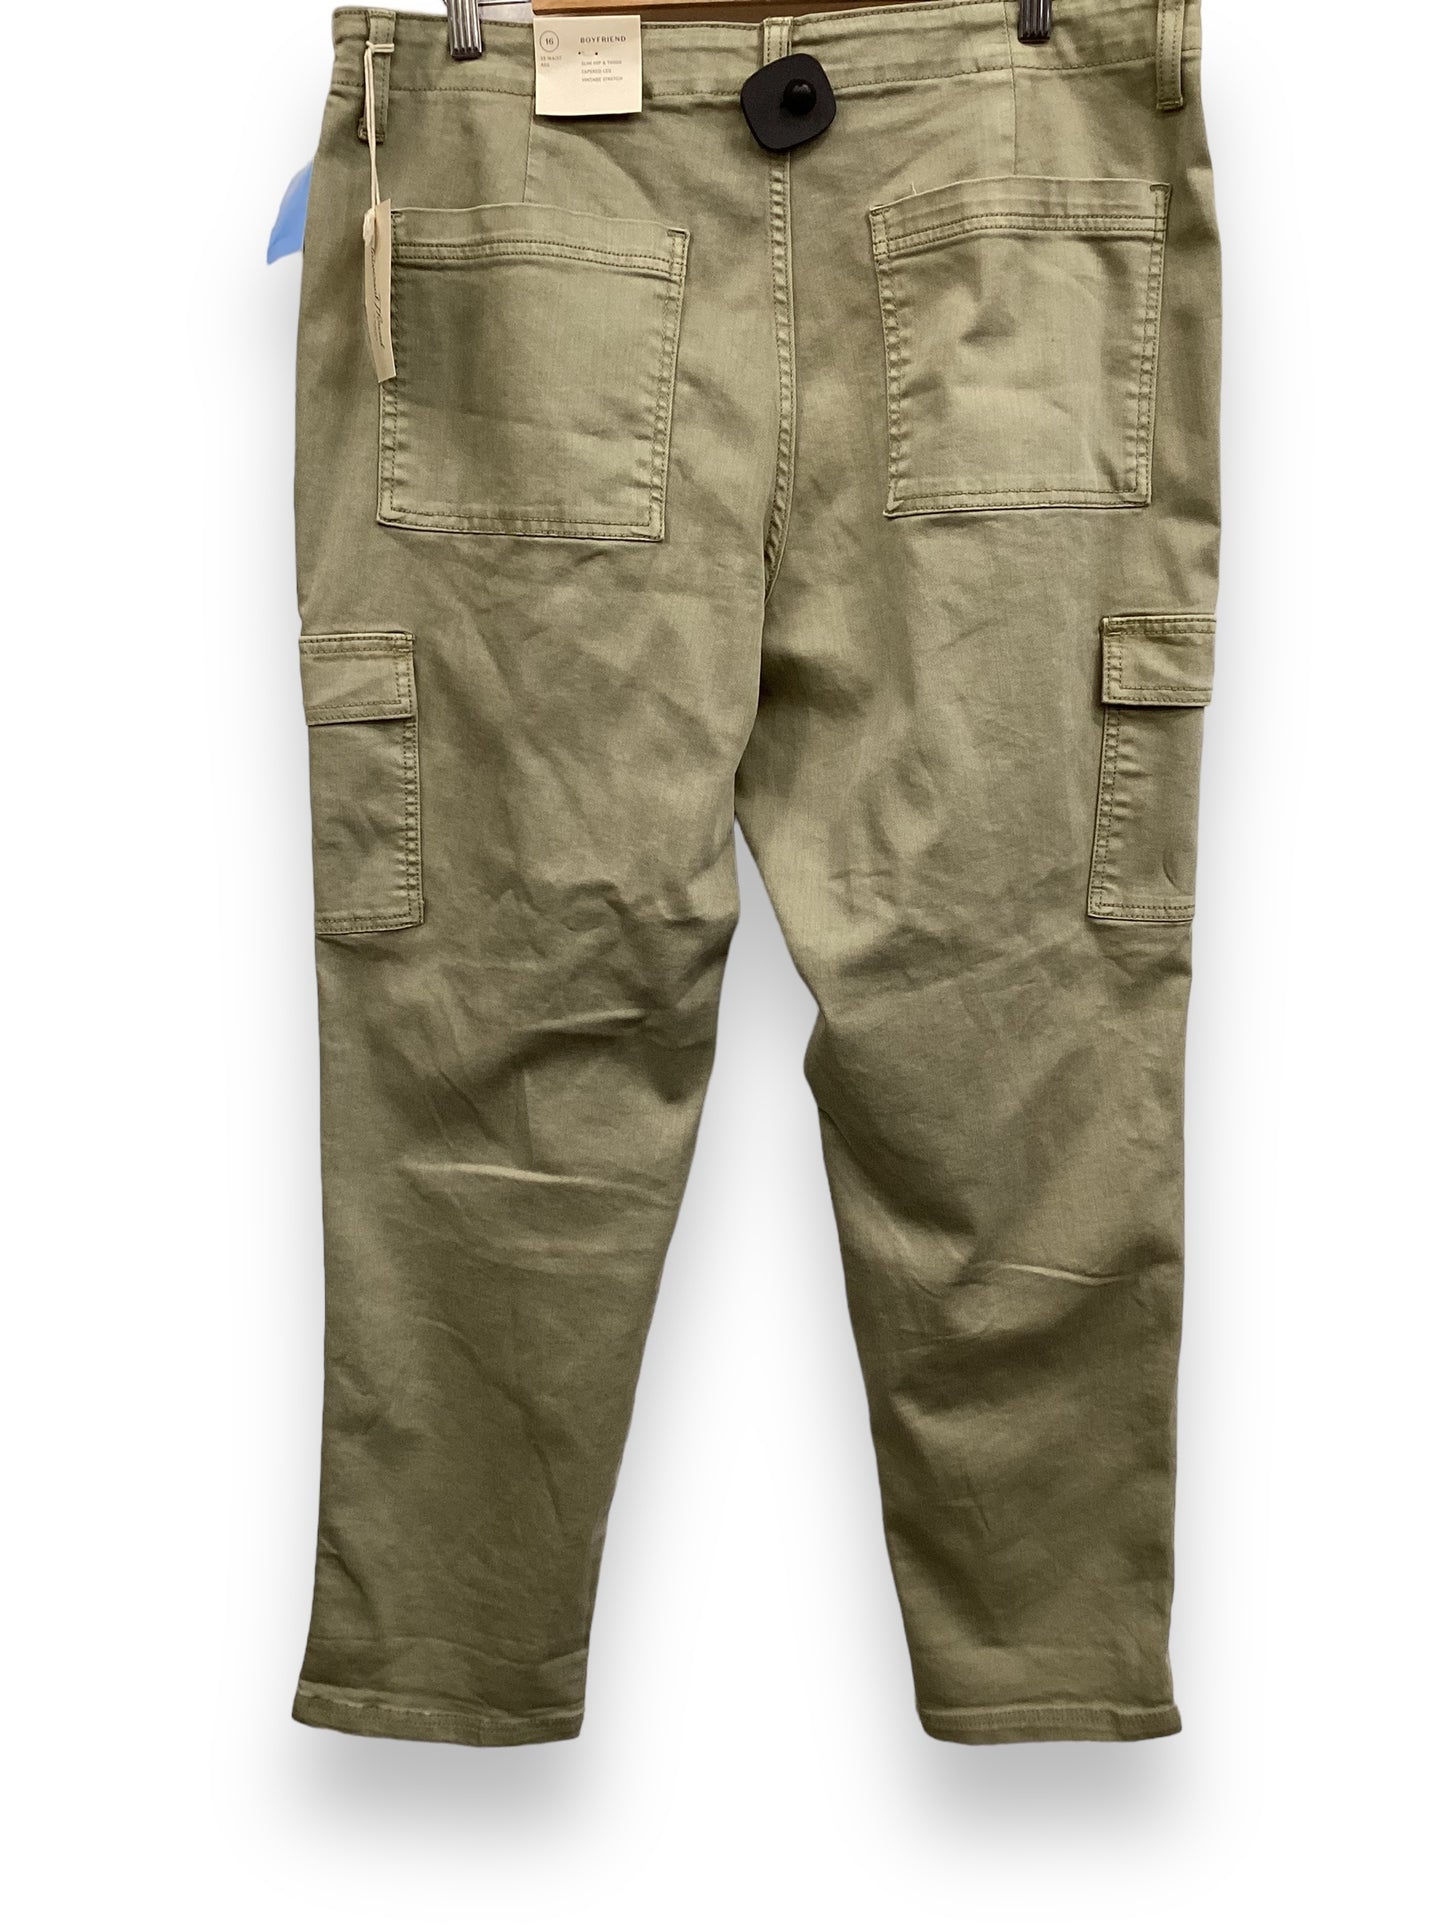 Pants Cargo & Utility By Universal Thread  Size: 16